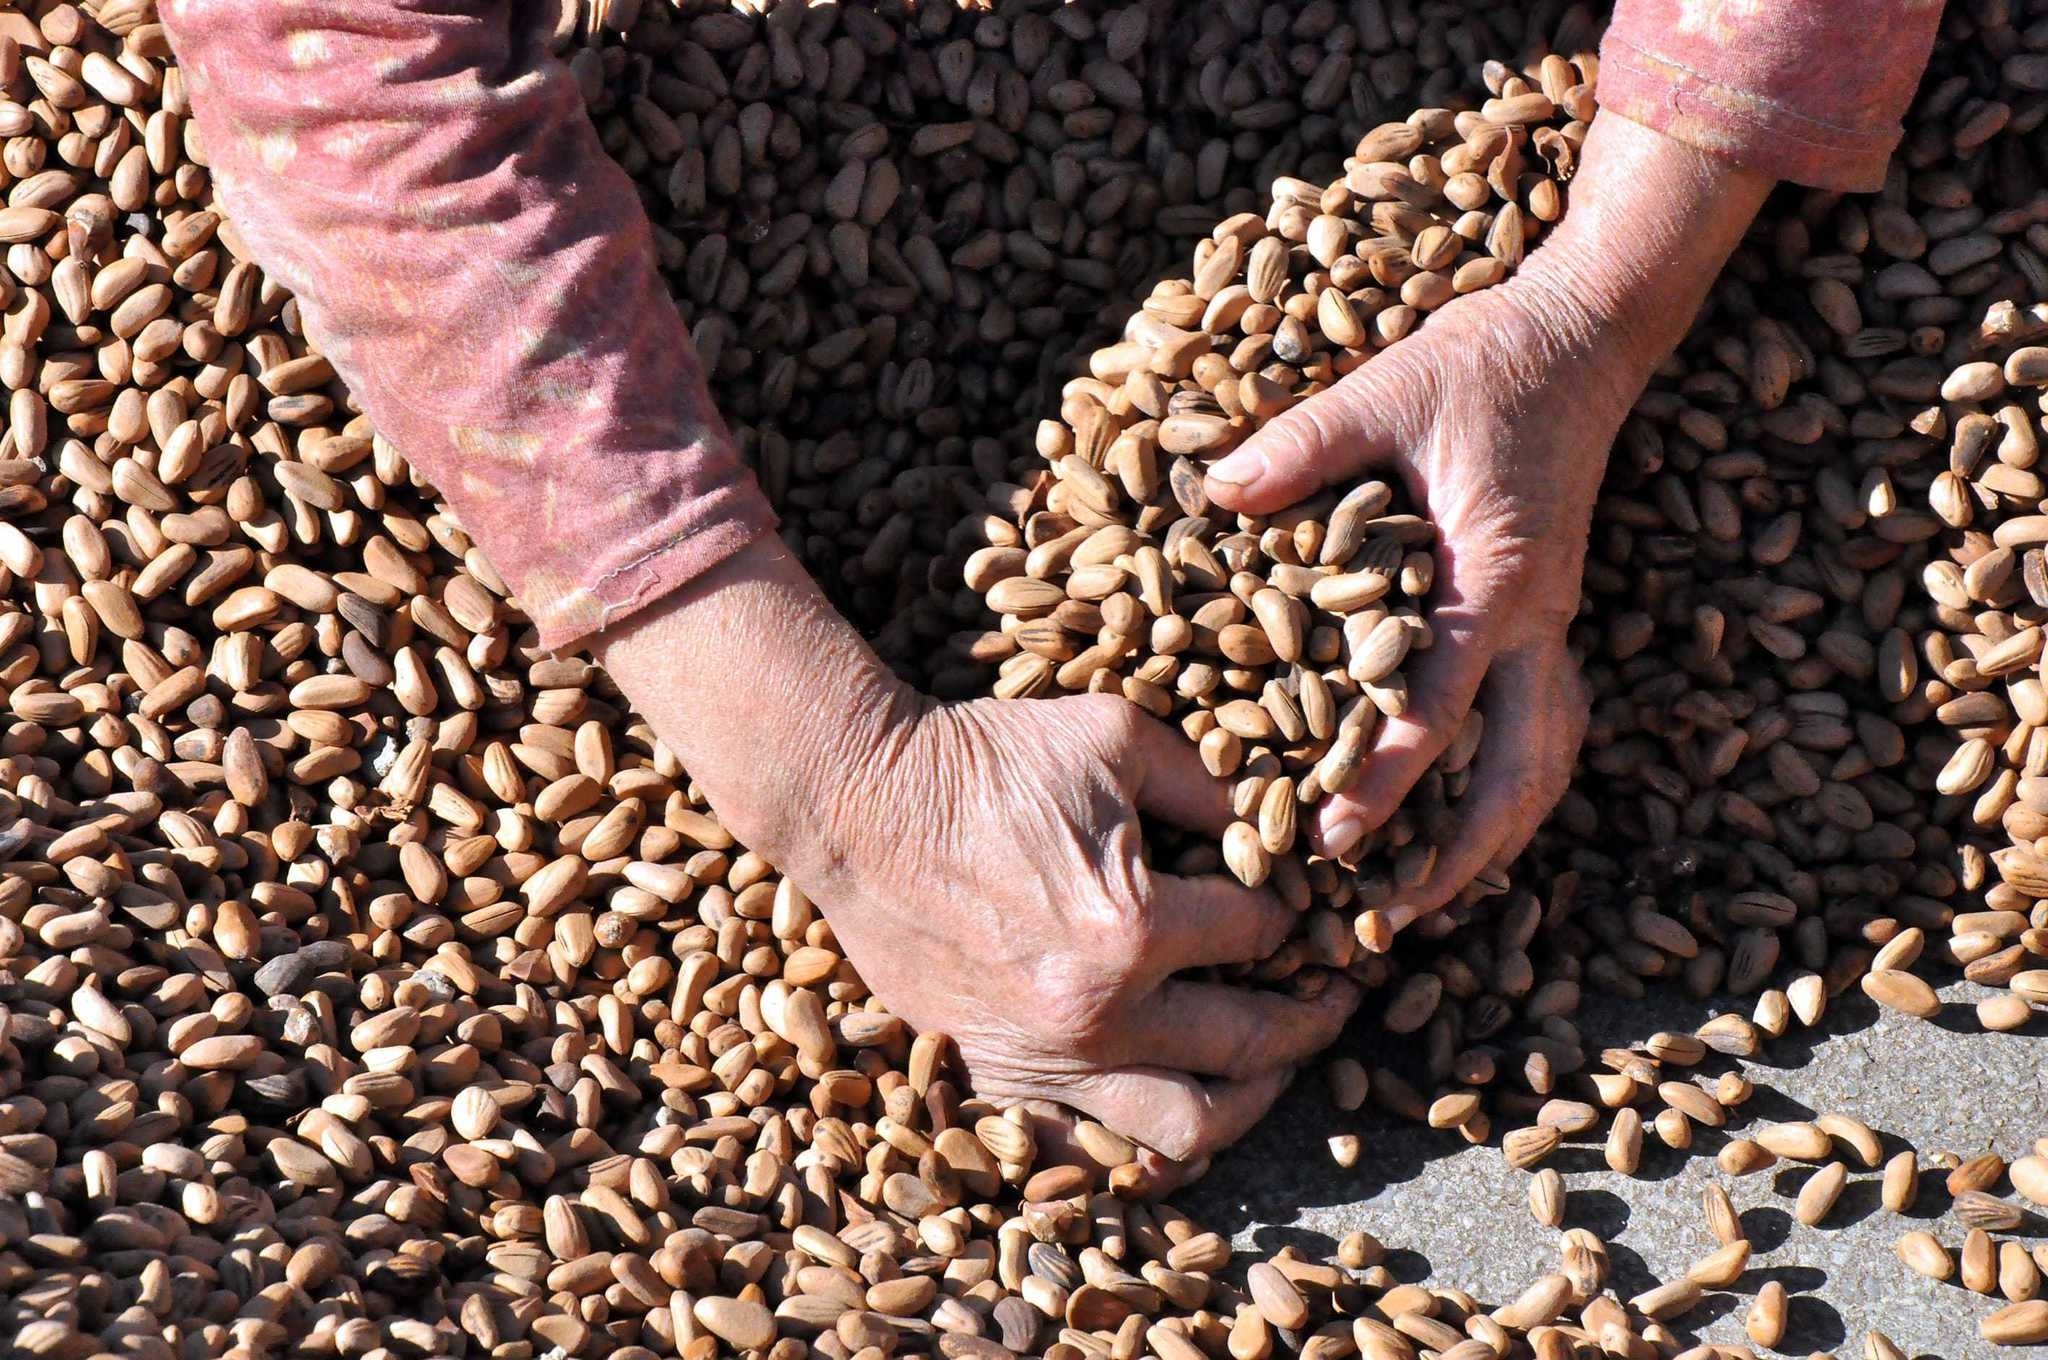 Per capita income of the 16 villages located in Kozak was $14,000 before global warming caused a severe reduction in the local pine nut production.